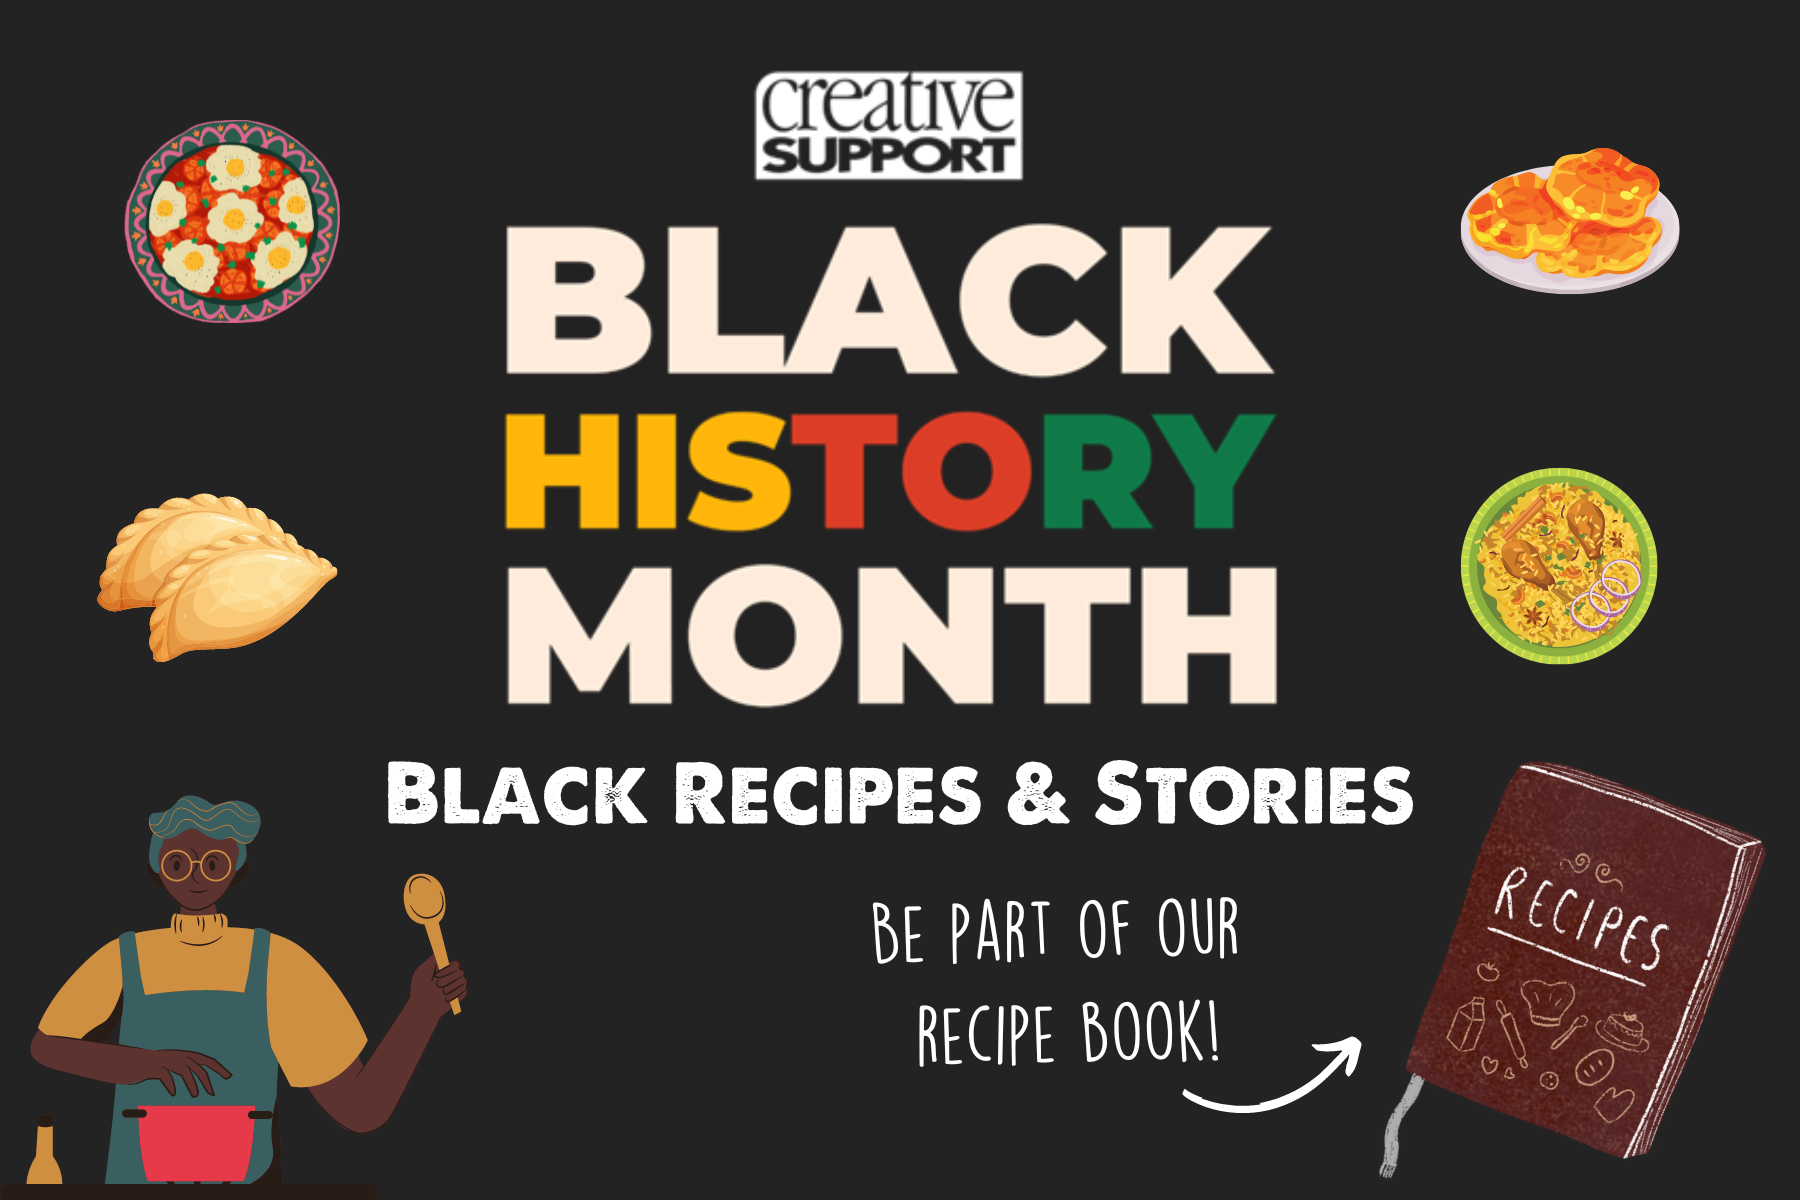 Black History Month: Share Your Recipes!